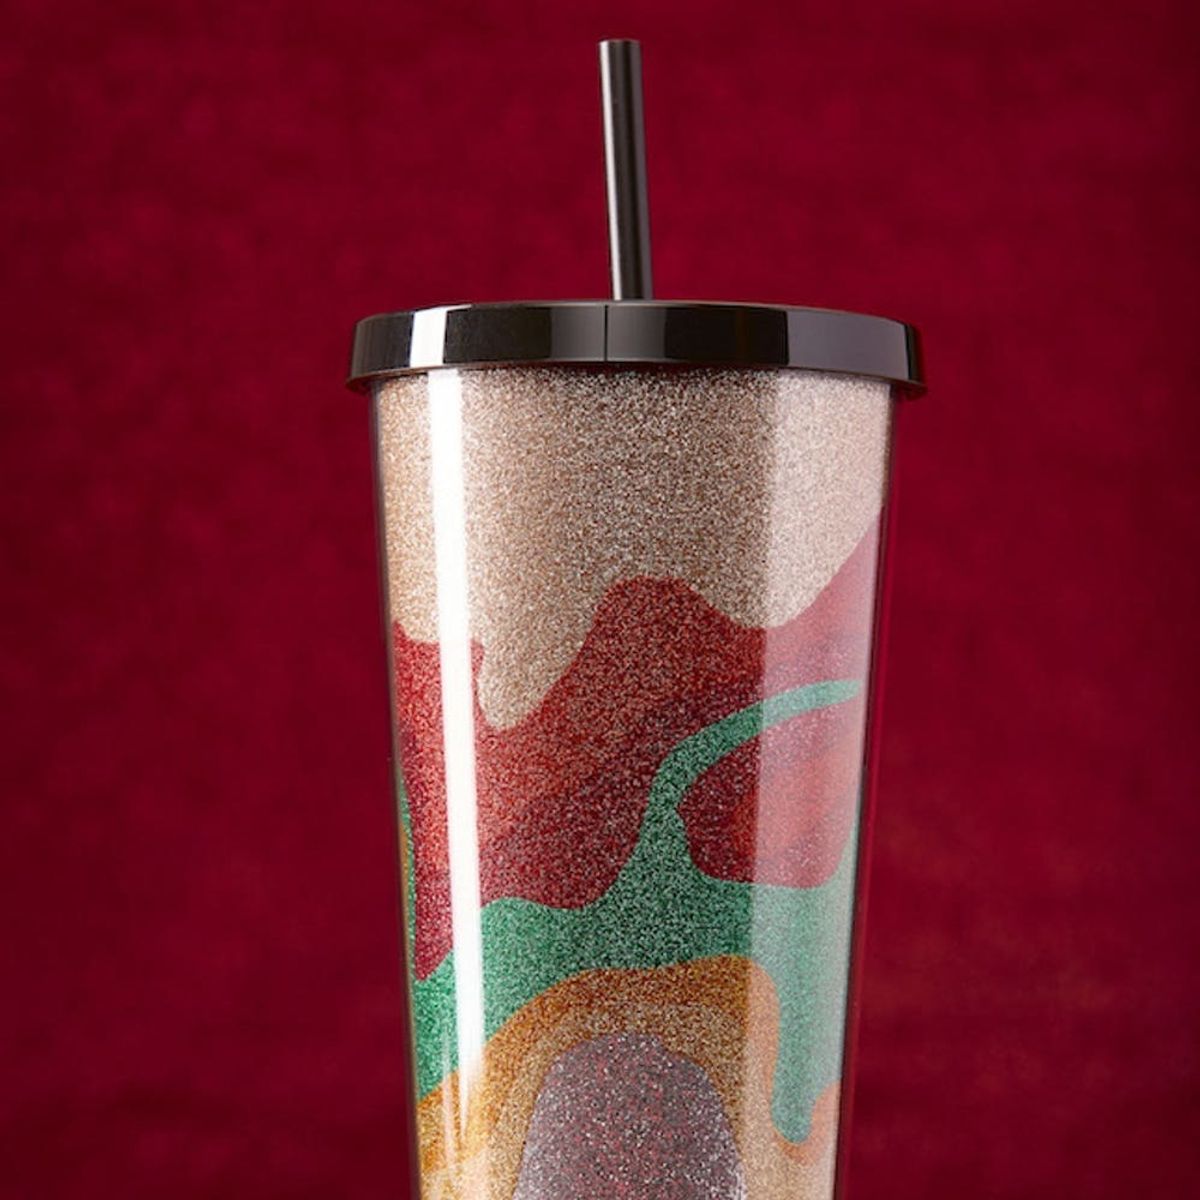 PSA: Starbucks’s Glittery 2018 Holiday Cups Have Arrived